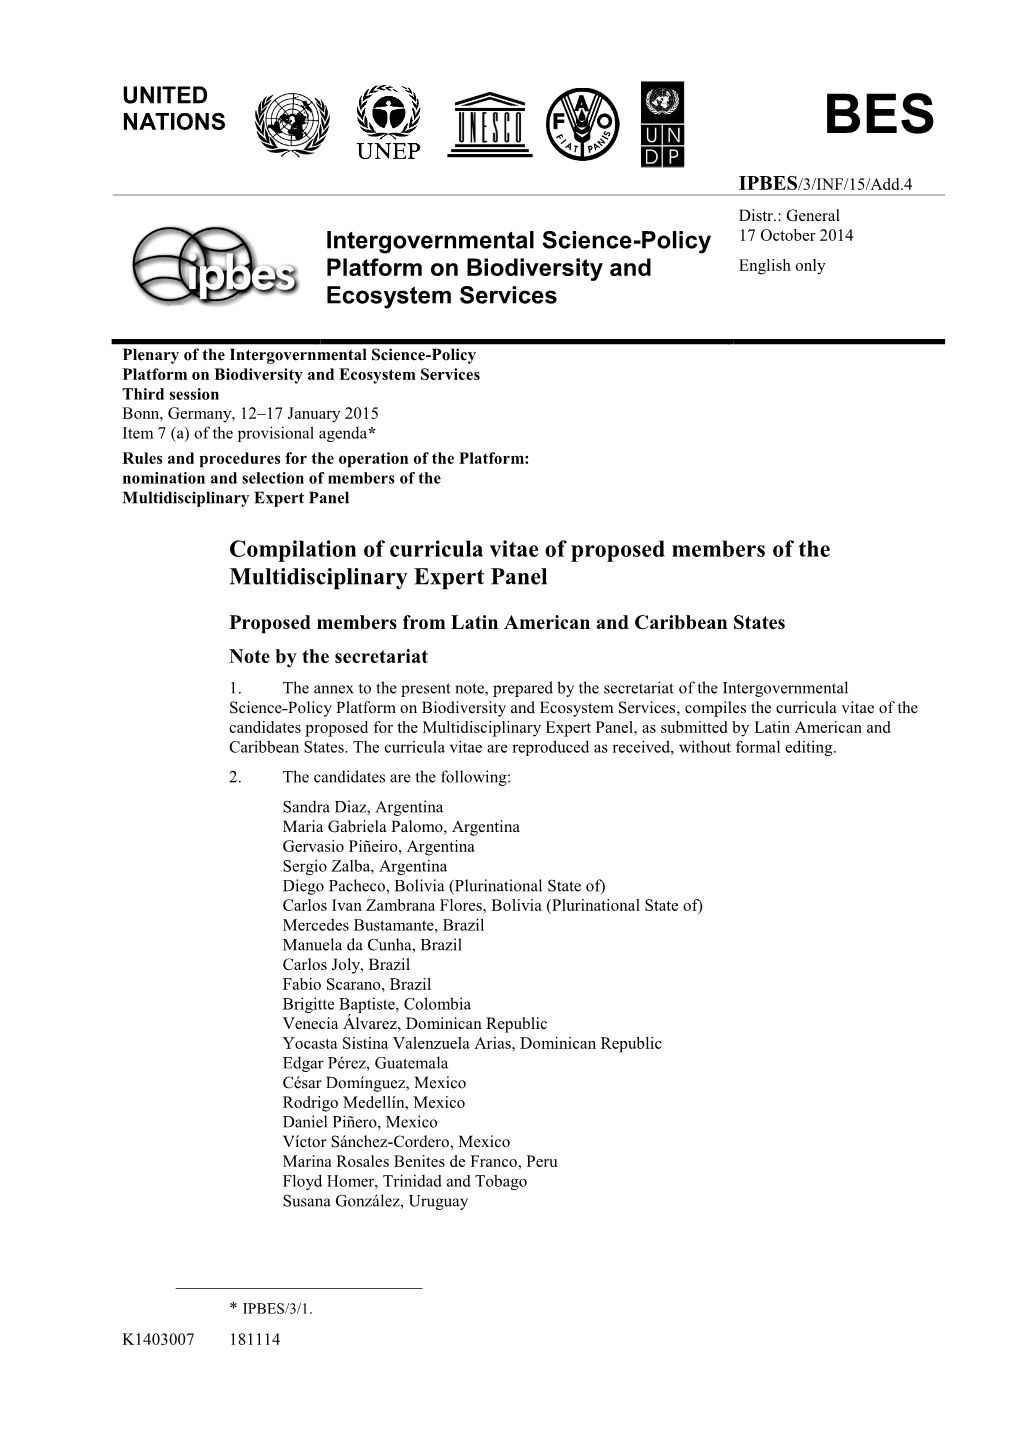 Intergovernmental Science-Policy Platform on Biodiversity and Ecosystem Services Compilation of Curricula Vitae of Proposed Memb